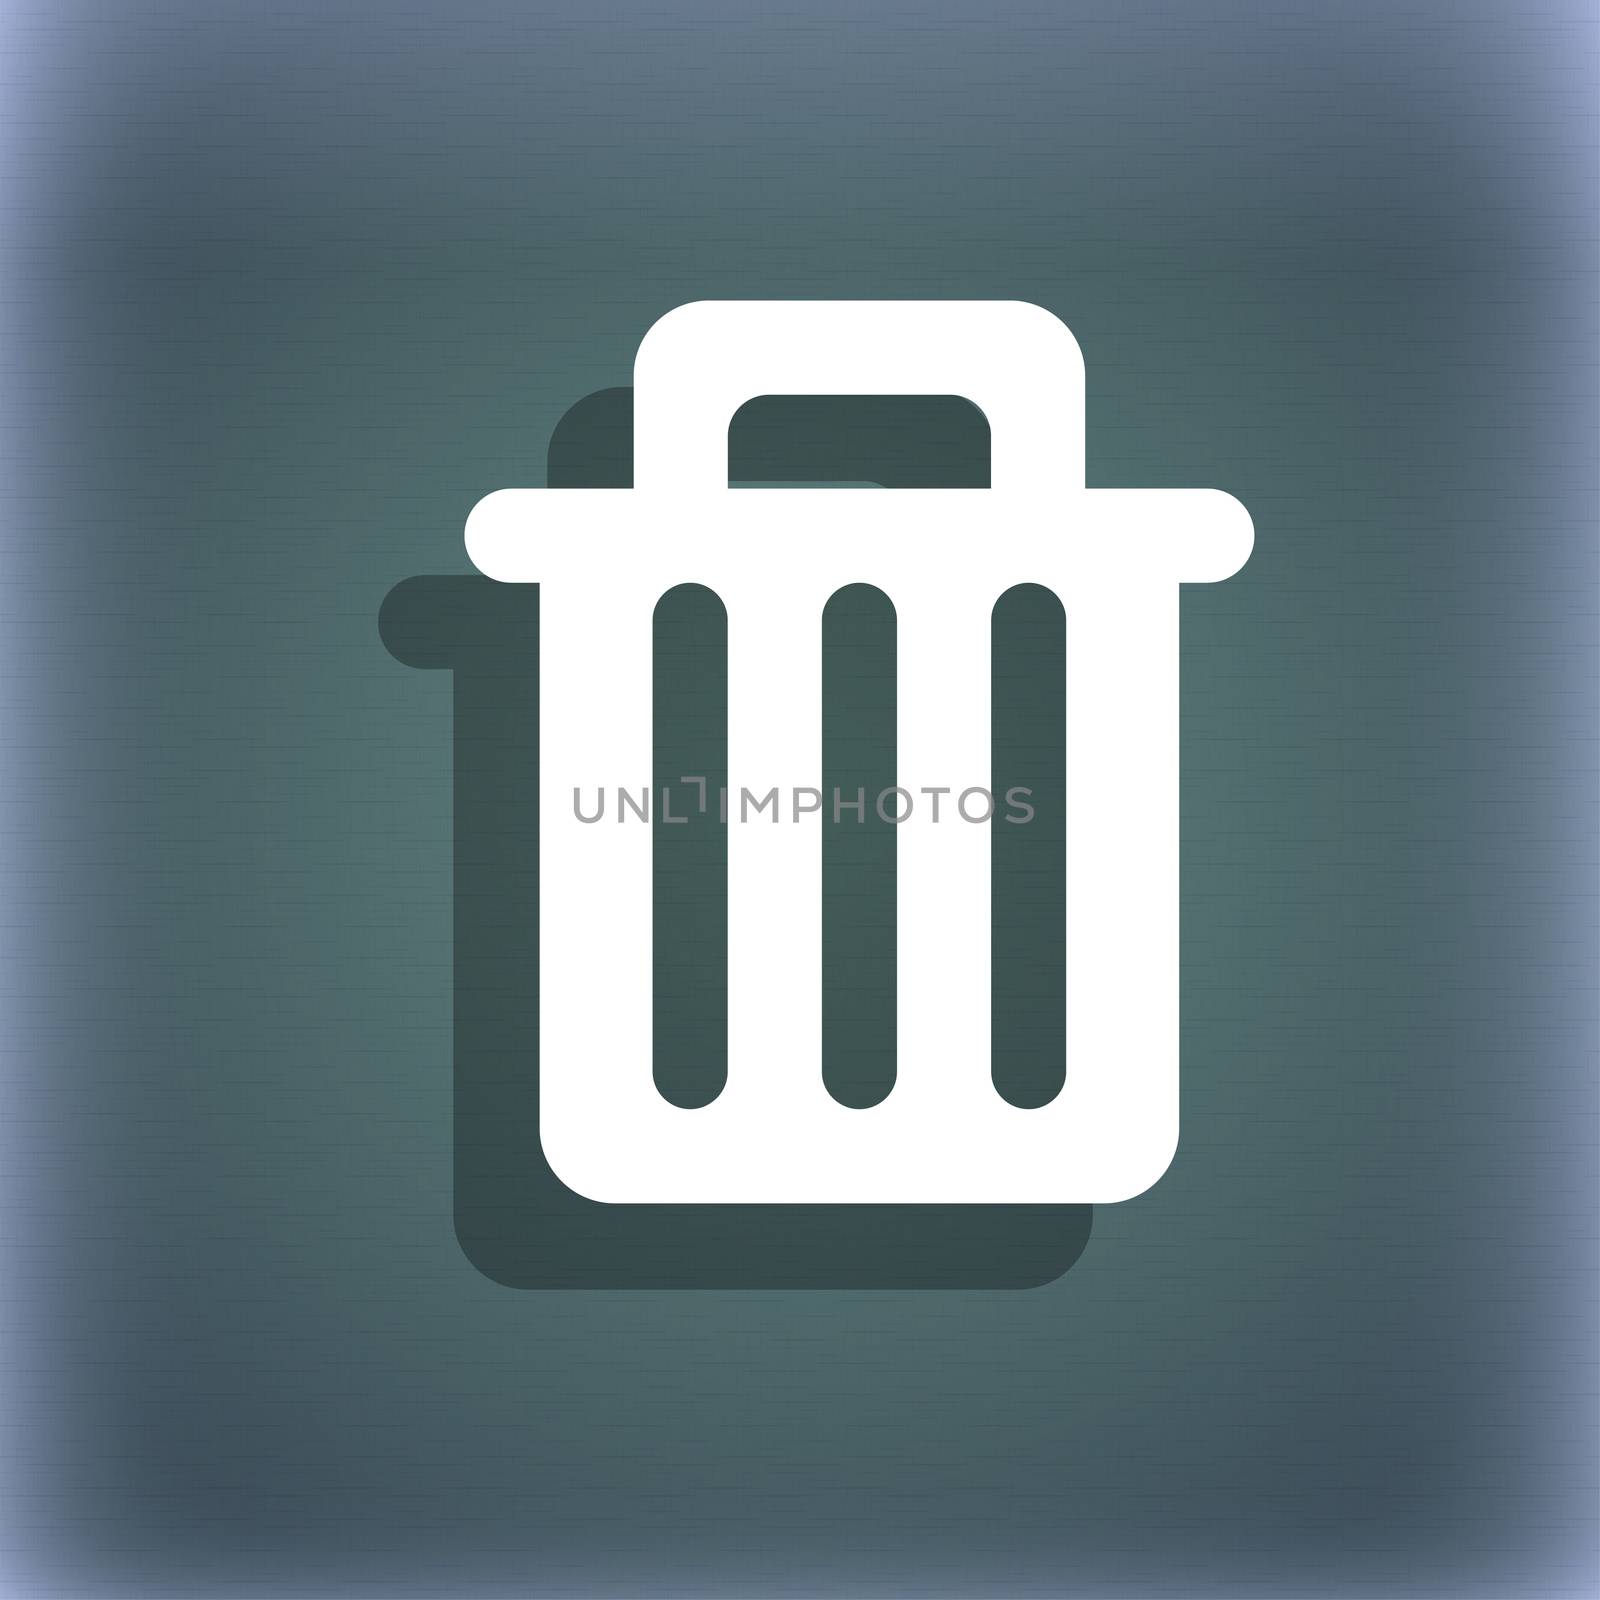 Recycle bin icon symbol on the blue-green abstract background with shadow and space for your text.  by serhii_lohvyniuk